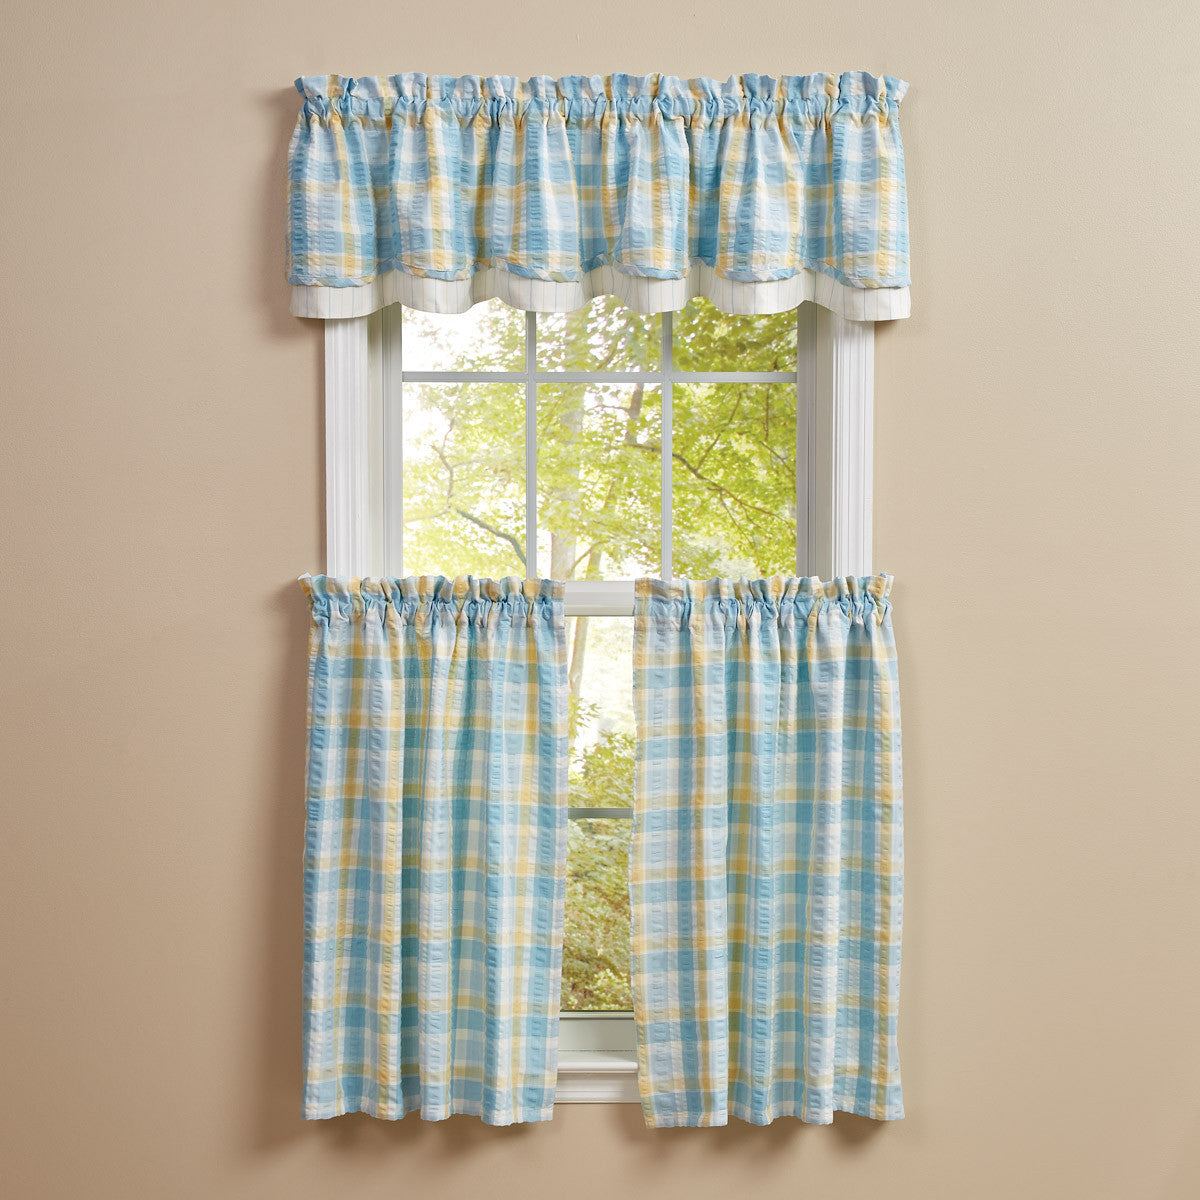 Forget Me Not Valance - Lined Layered 72x16 Park Designs